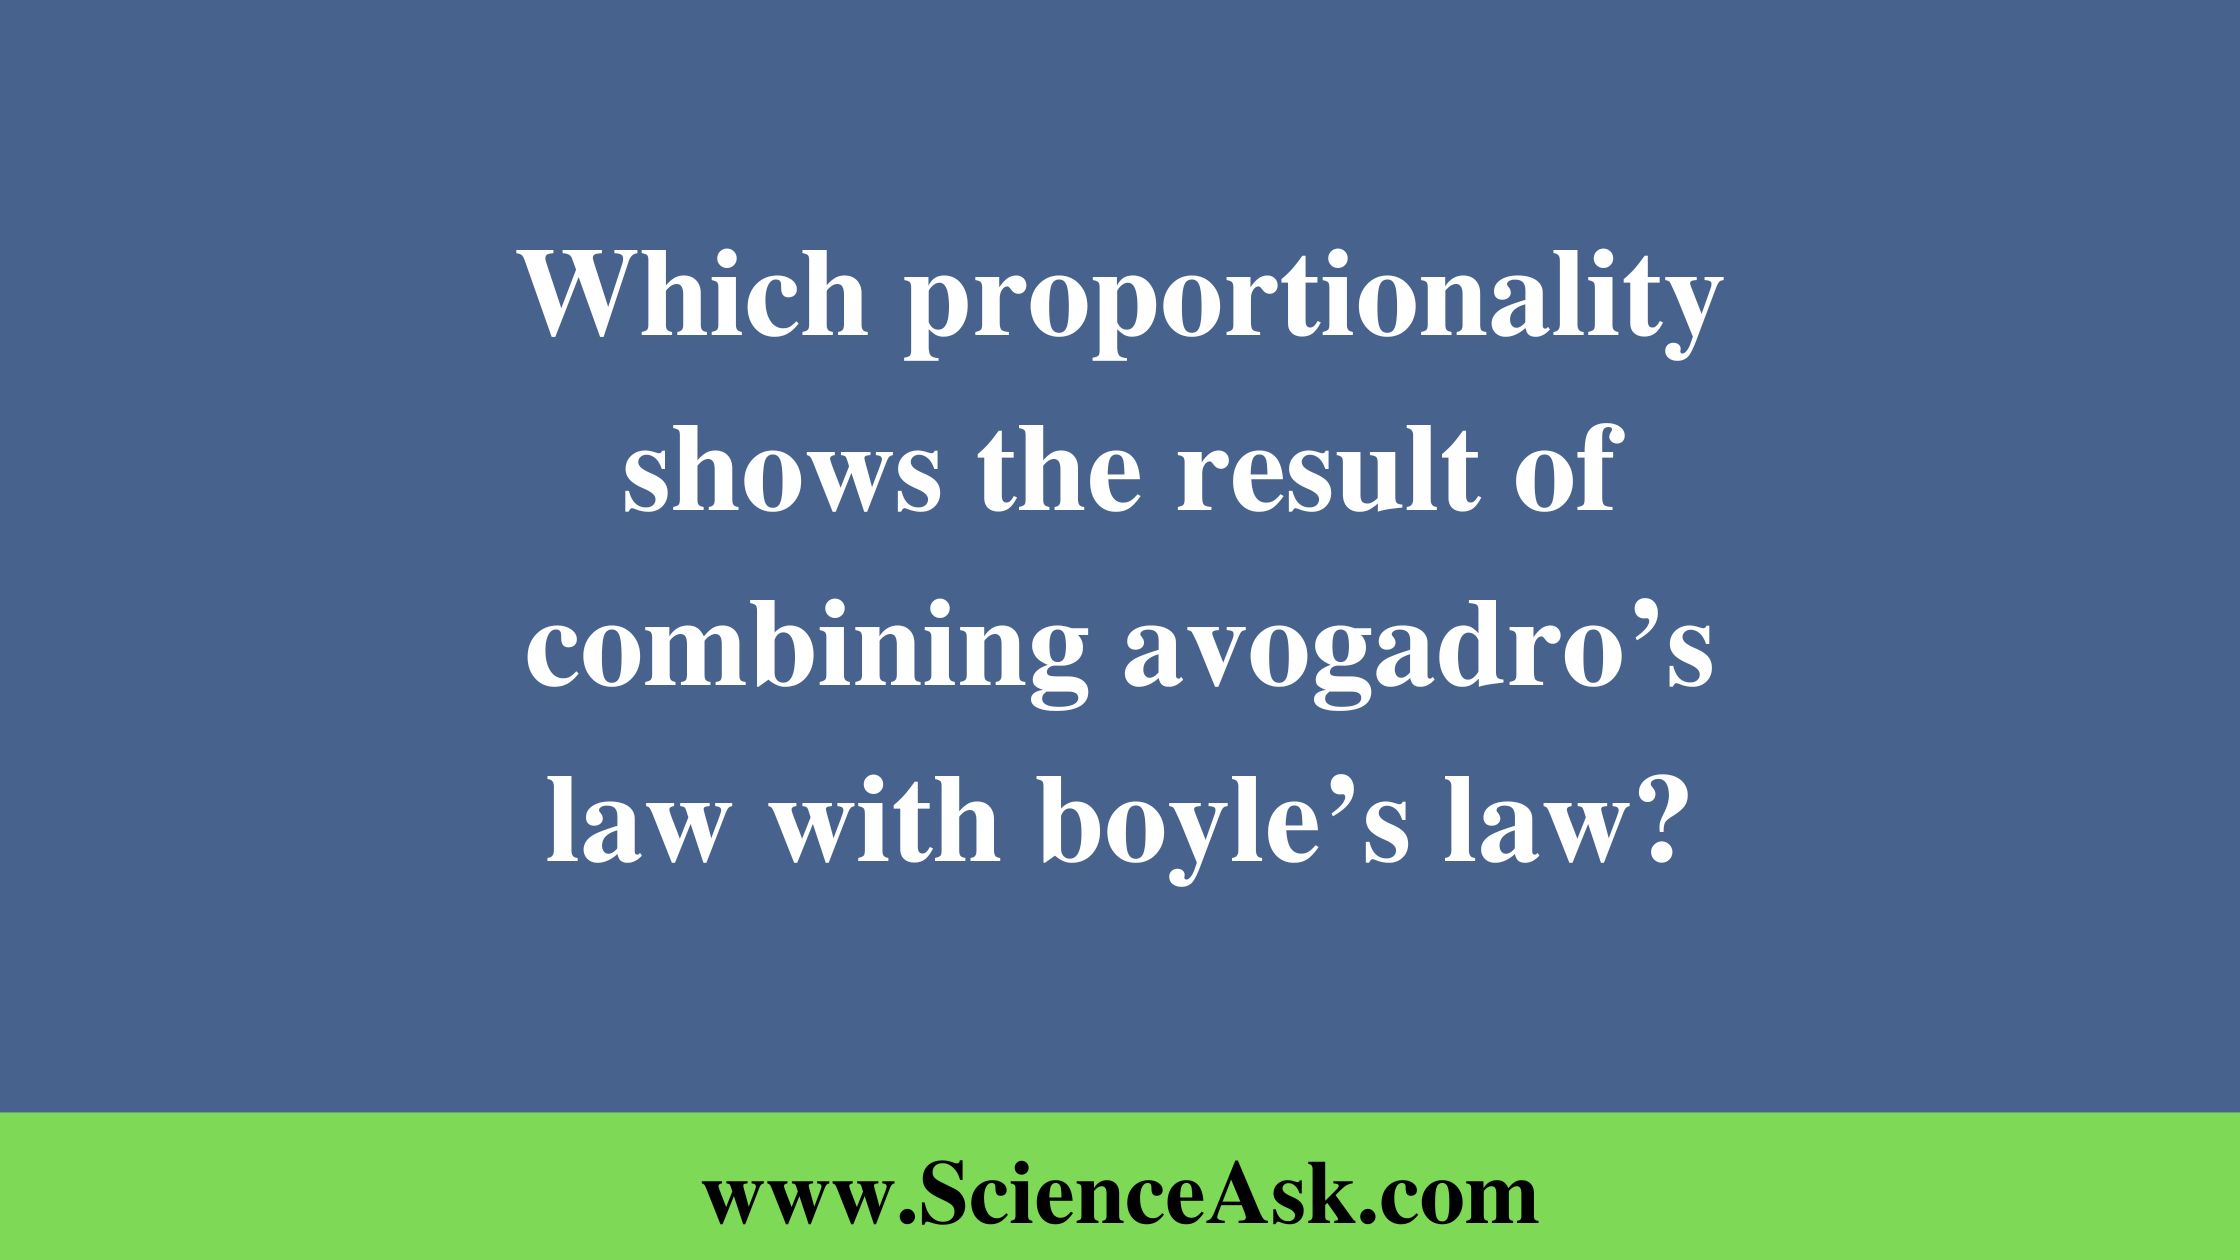 Which proportionality shows the result of combining avogadro’s law with boyle’s law?